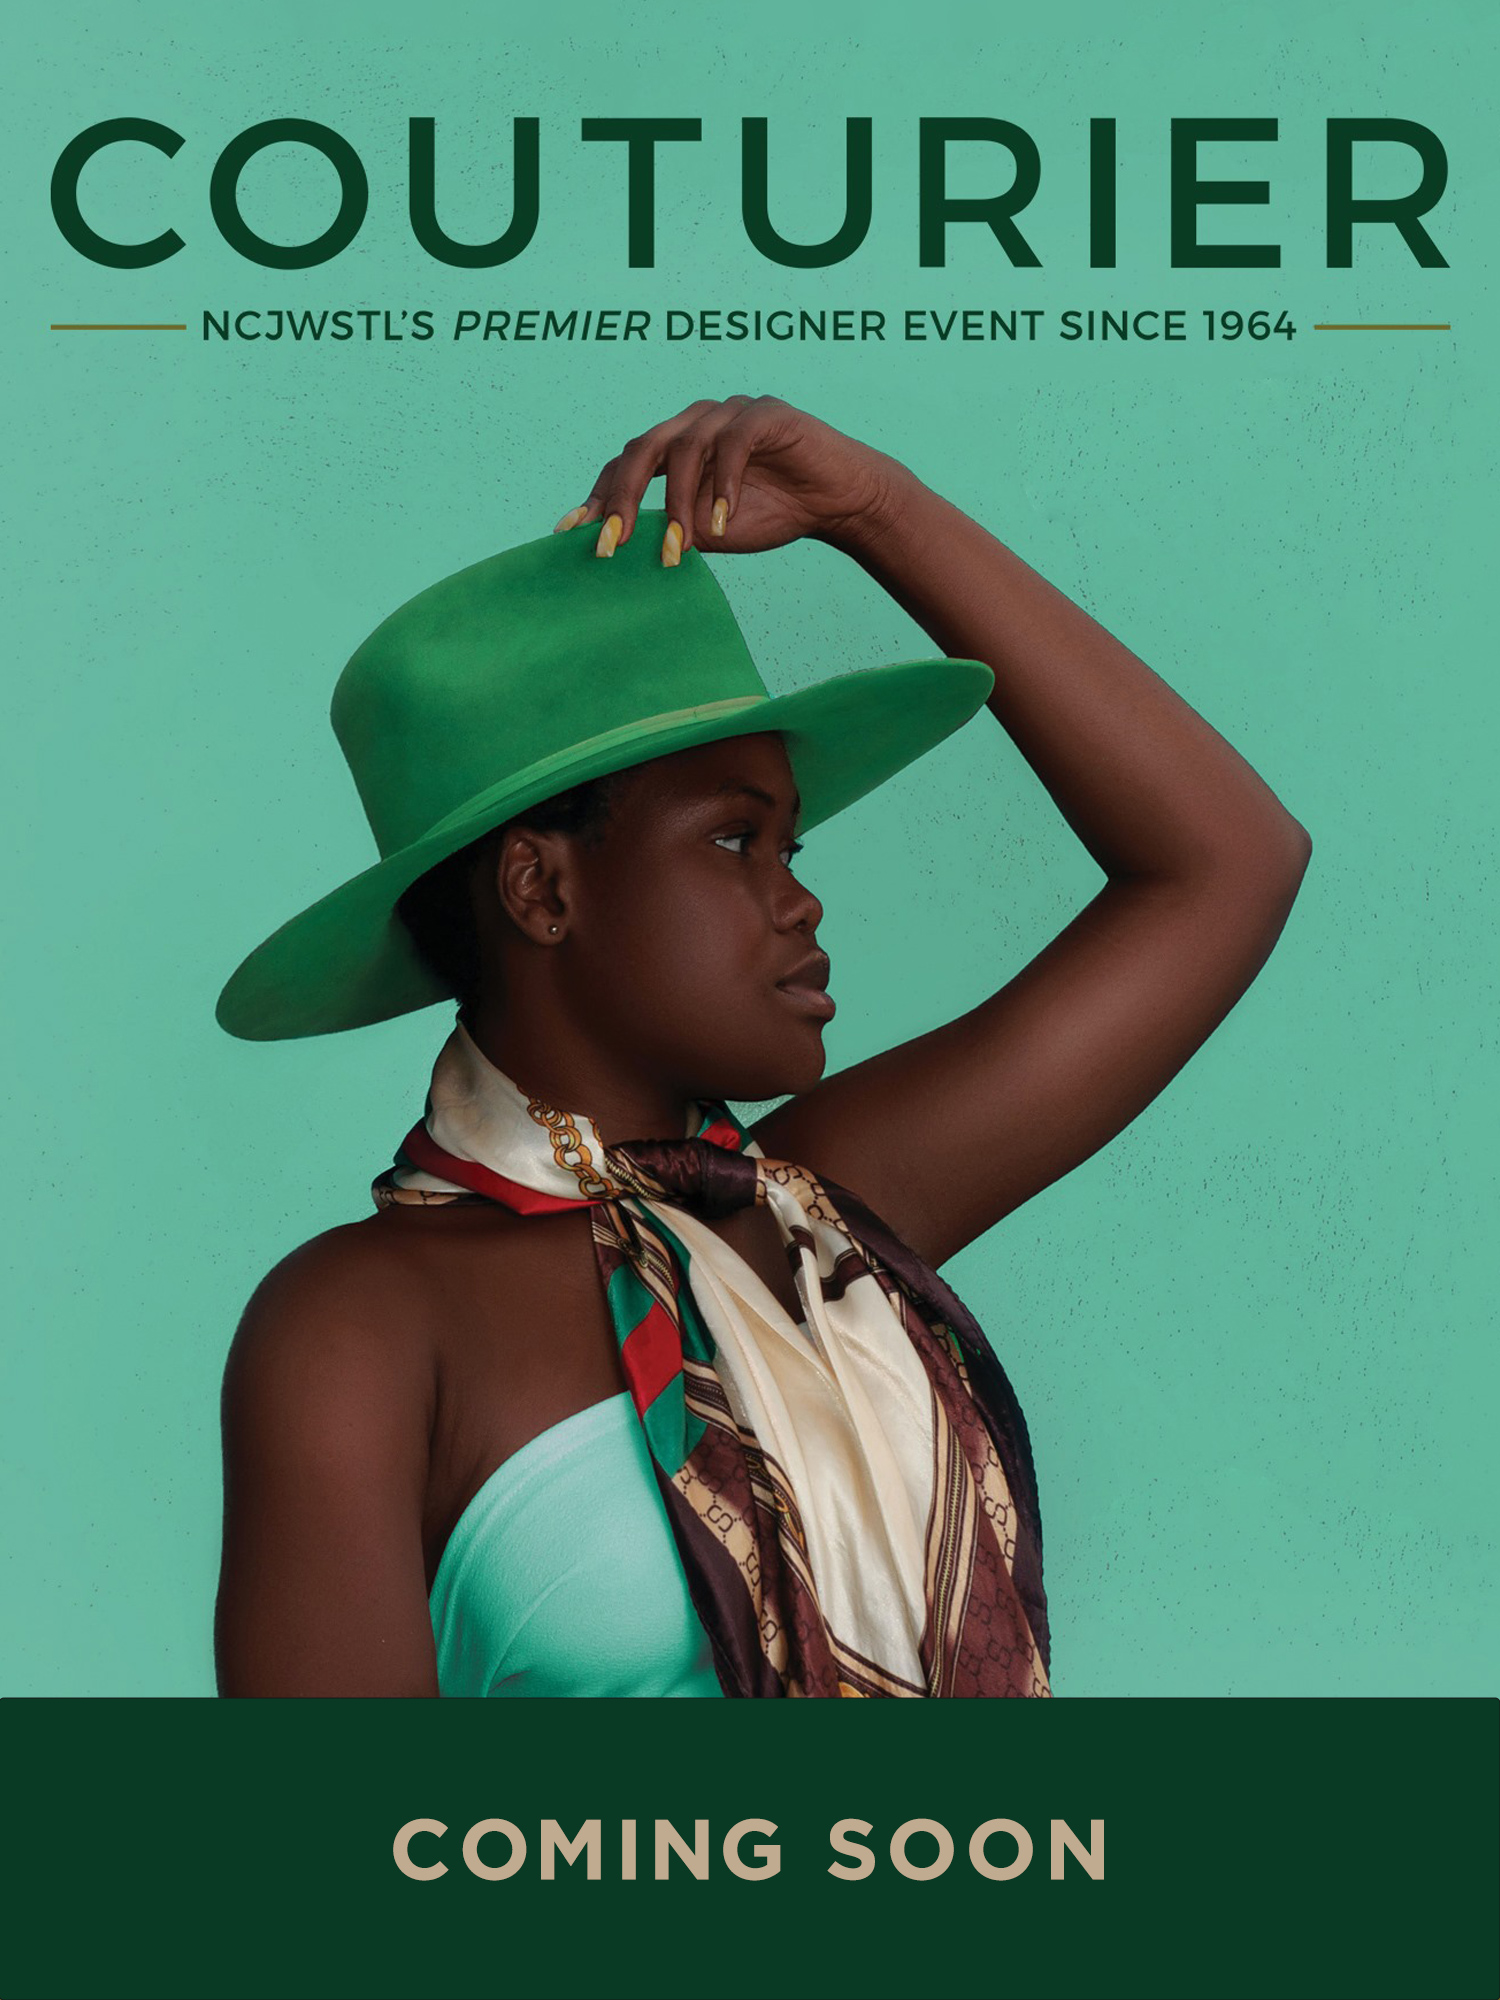 green "Coming Soon" graphic for 2022 Couturier featuring Black female model in designer dress, scarf, and hat